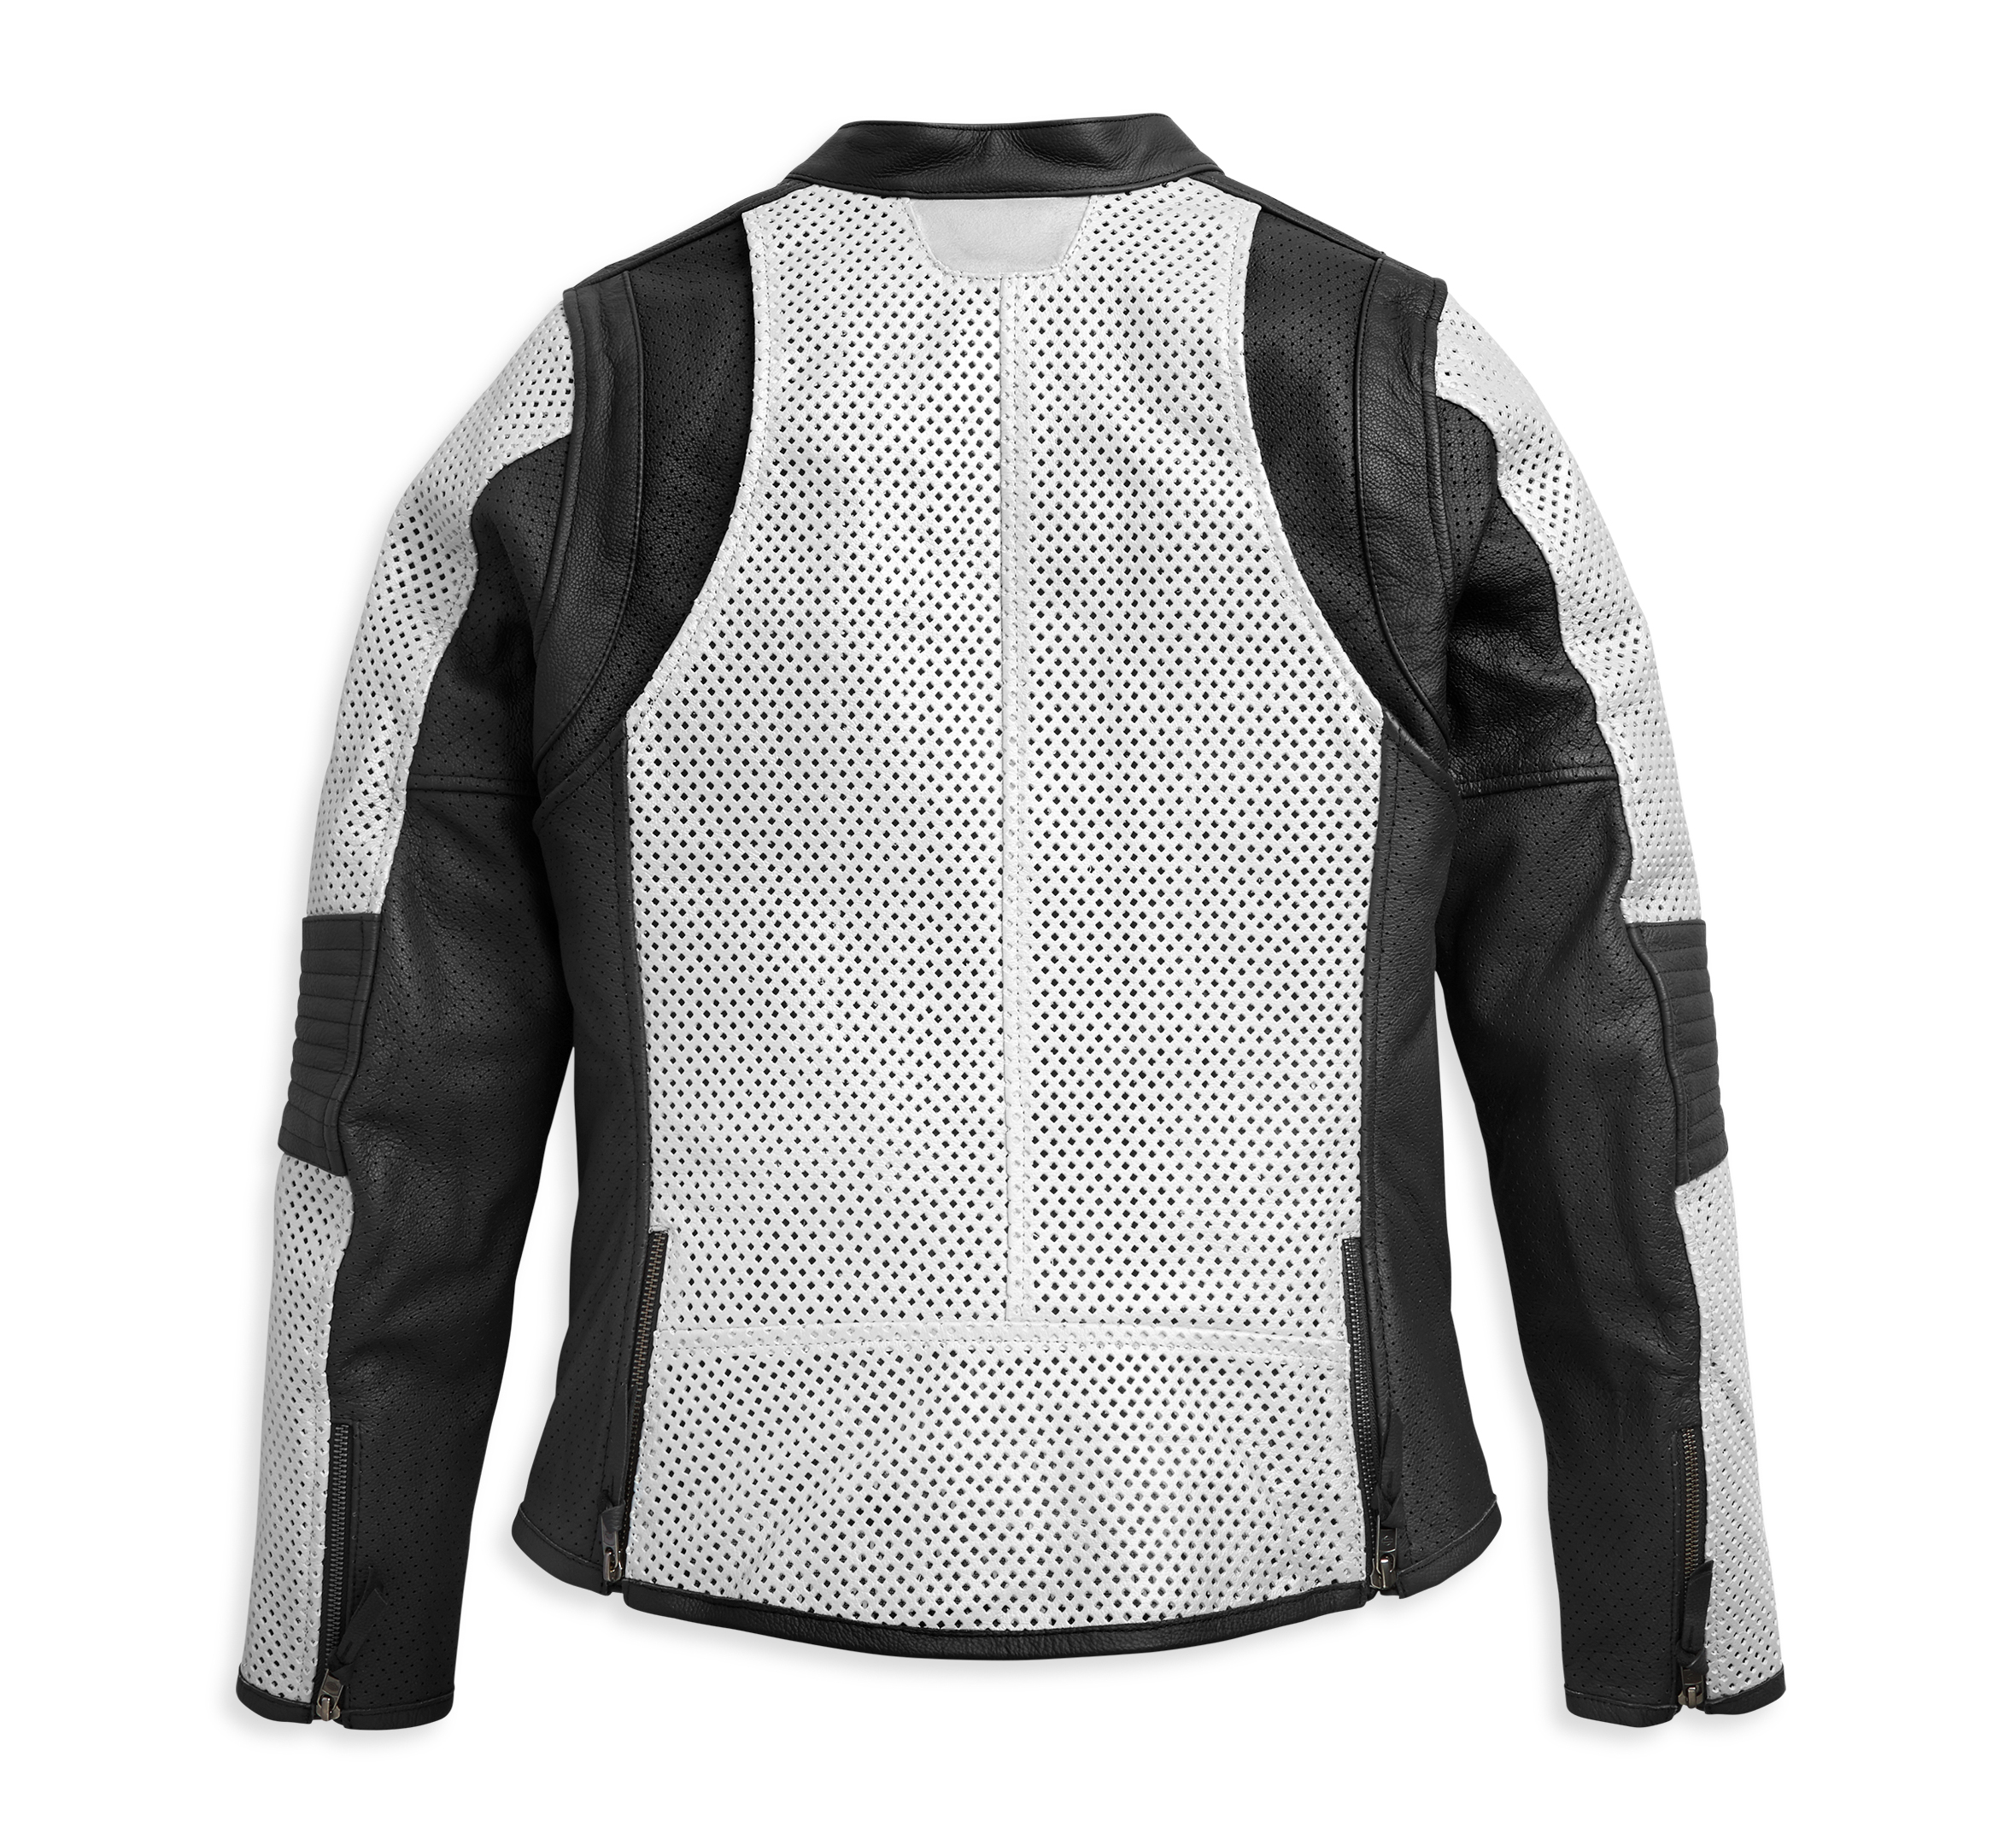 Women's Hideaway Perforated Leather Jacket | Harley-Davidson USA